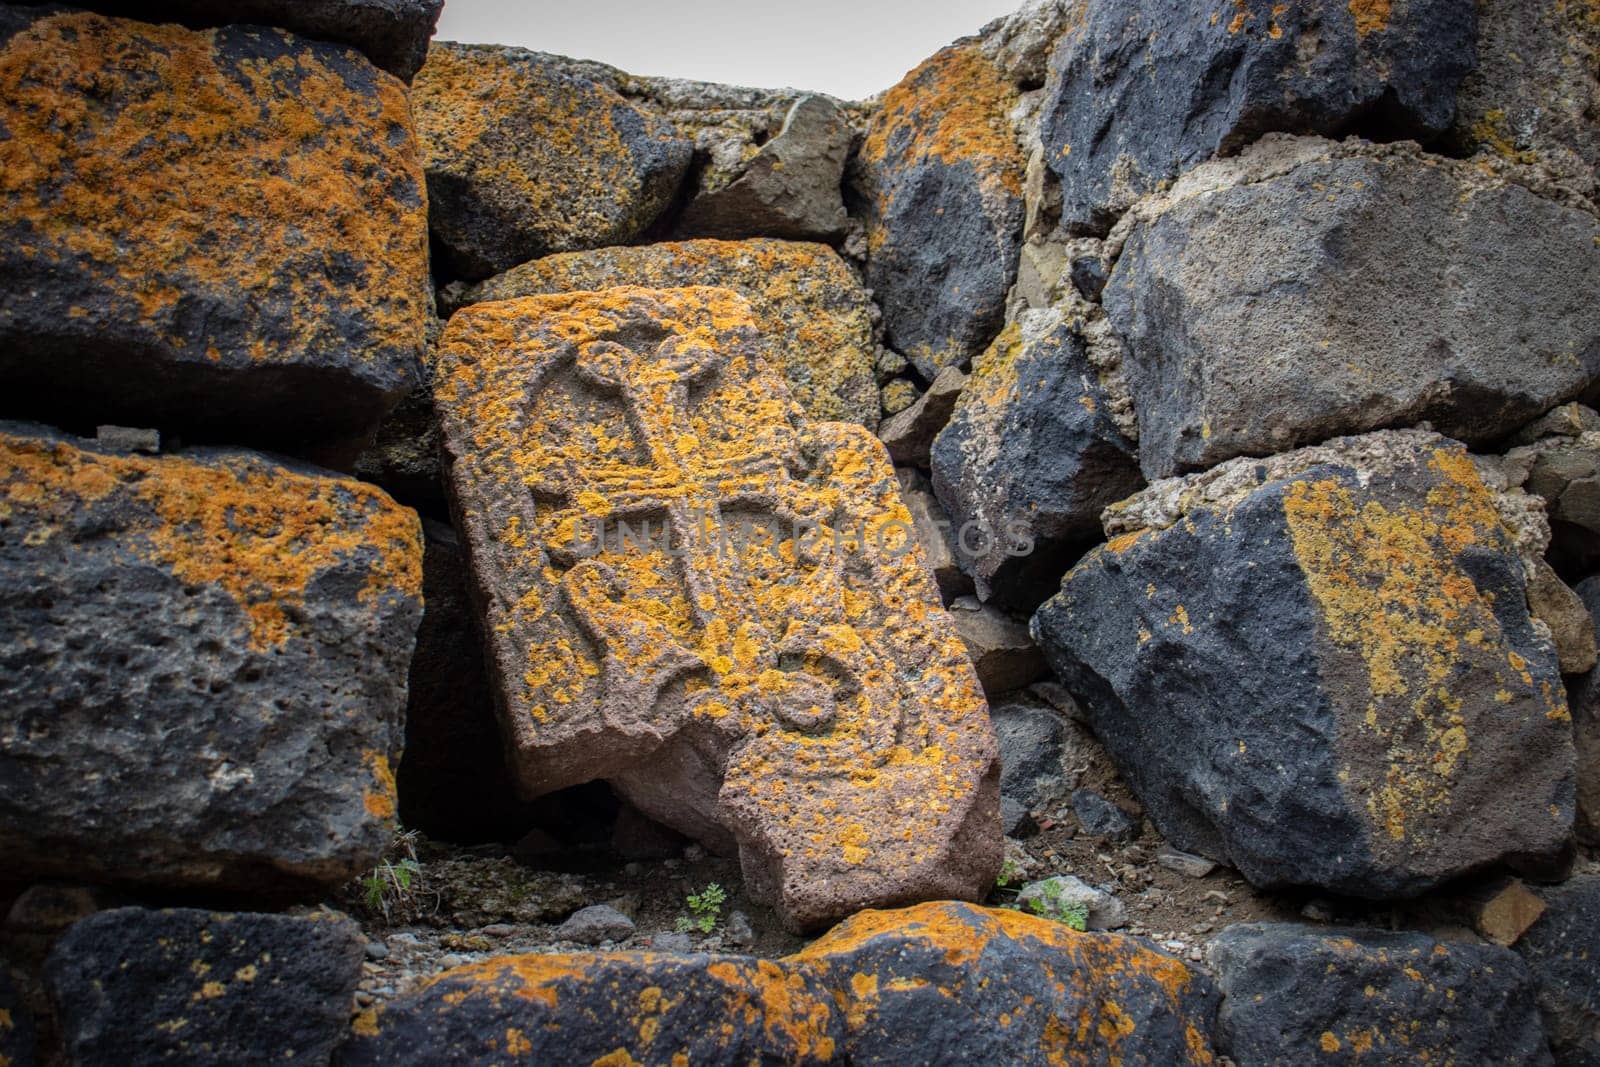 Close up stone cross with yellow lichen on rough stone wall concept photo. Historical tombs and head stones. Rocks full of the moss texture in nature for wallpaper.